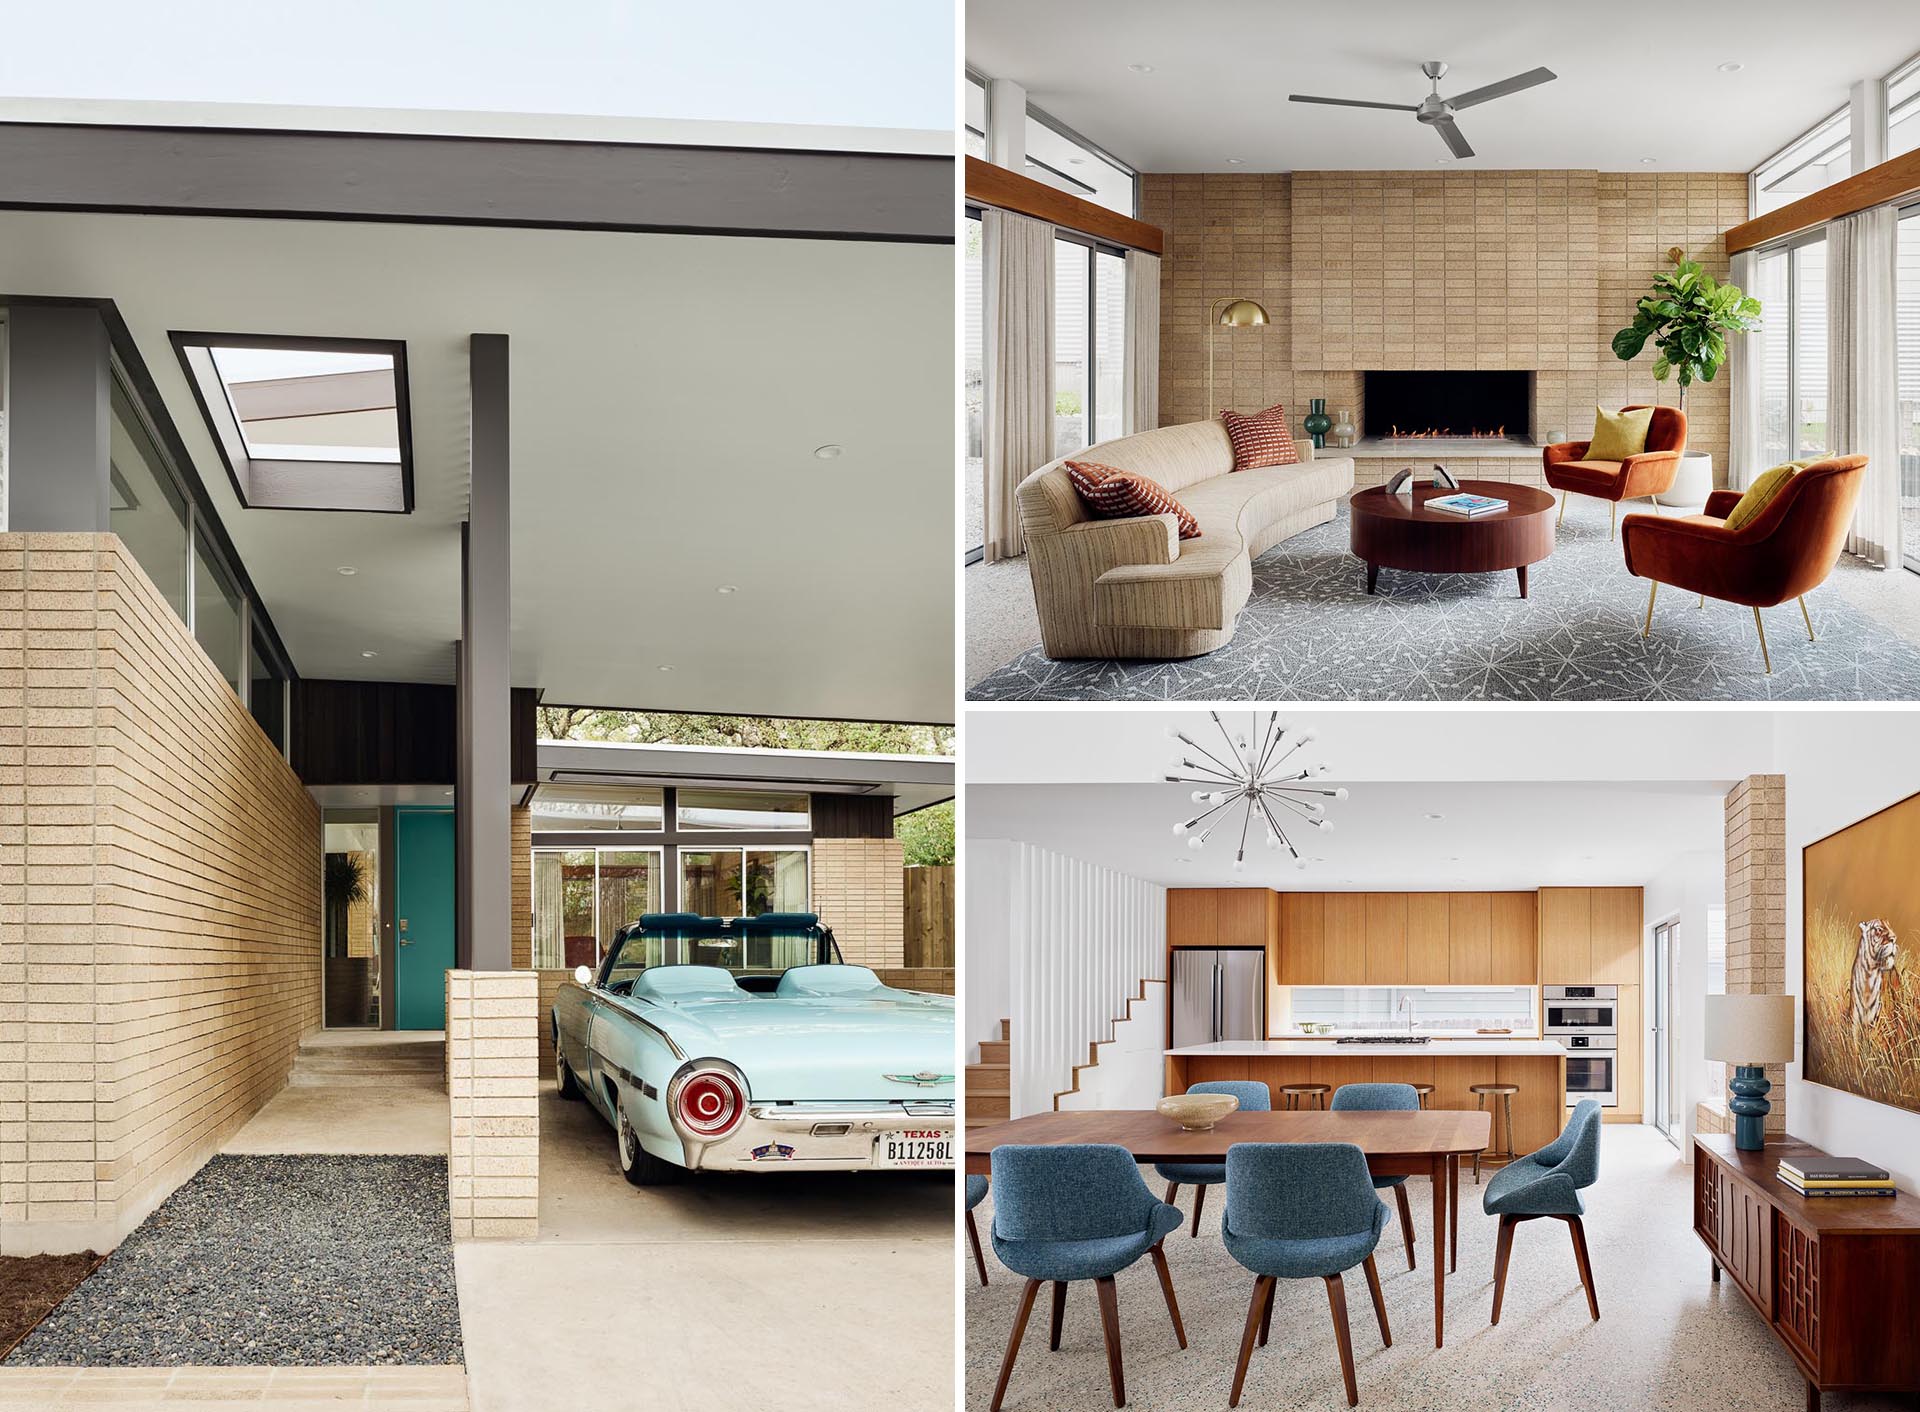 A mid-century modern inspired home with a brick fireplace, high ceilings, a wood kitchen, and one-of-a-kind concrete floor with colorful glass finish.